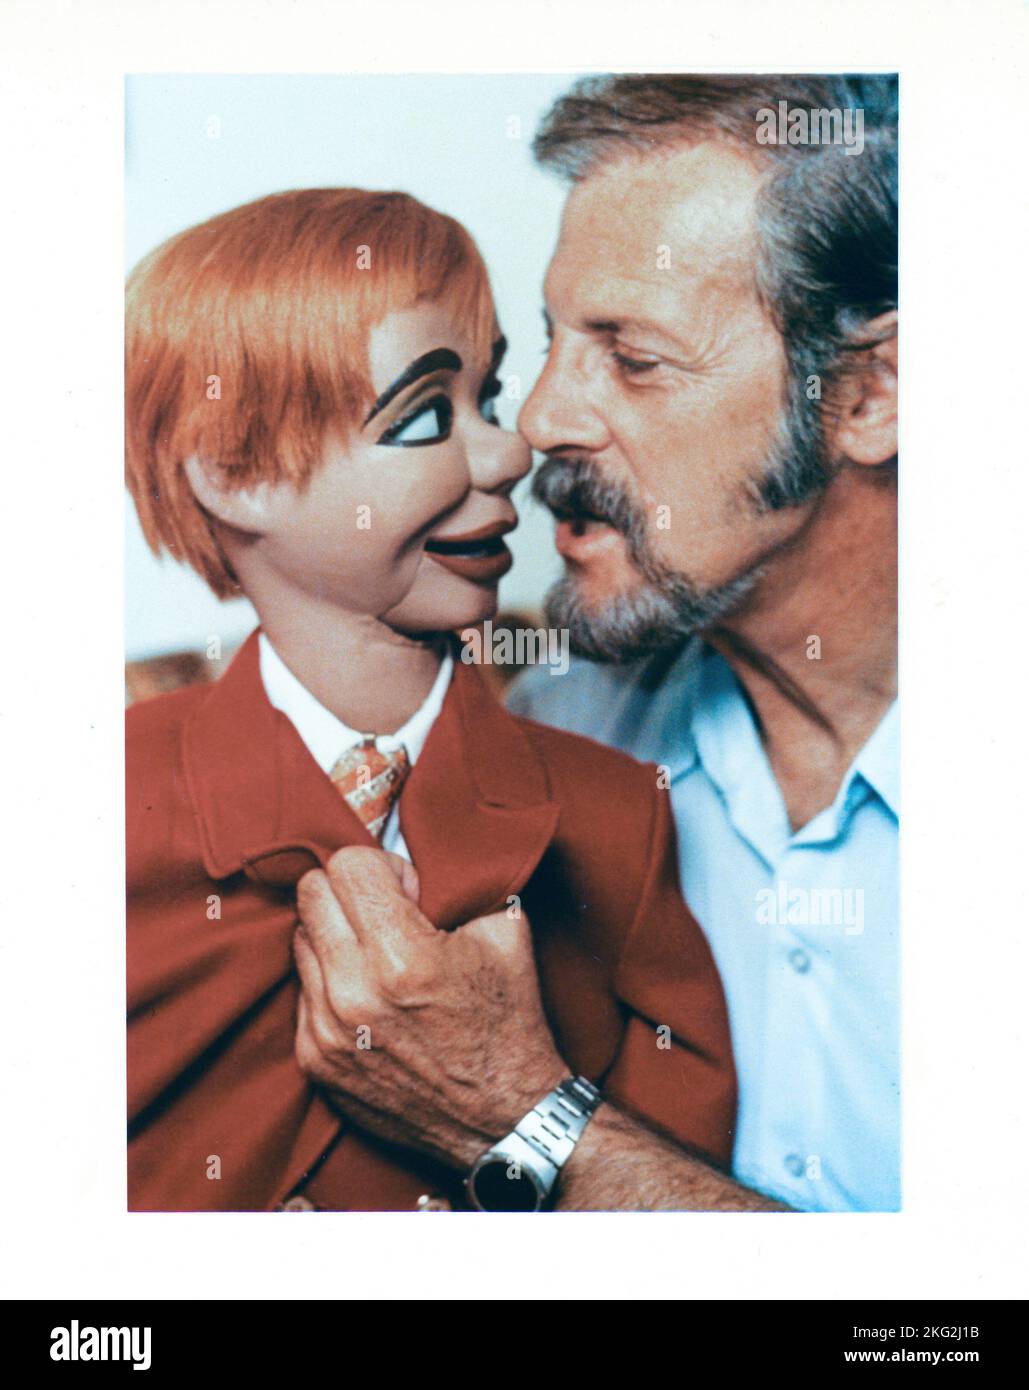 Ventriloquist, inventor, painter, acupuncturist and TV pioneer Paul Winchell poses with his handmade puppet, Jerry Mahoney. 1976 in Sylmar, CA. Stock Photo